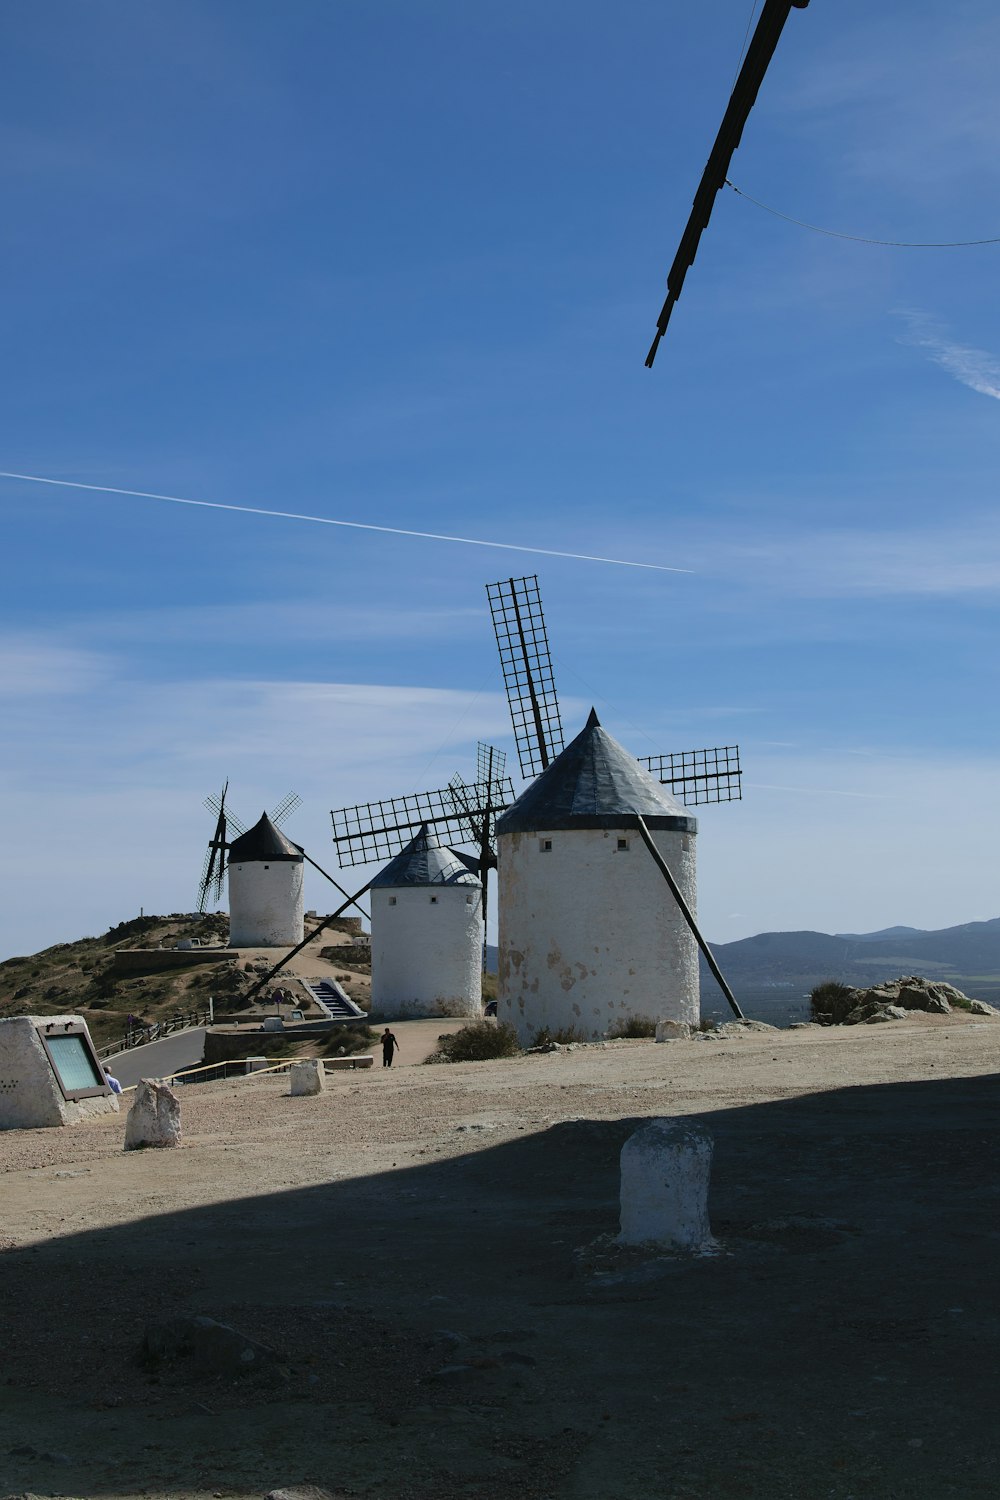 three windmills on a hill with a blue sky in the background